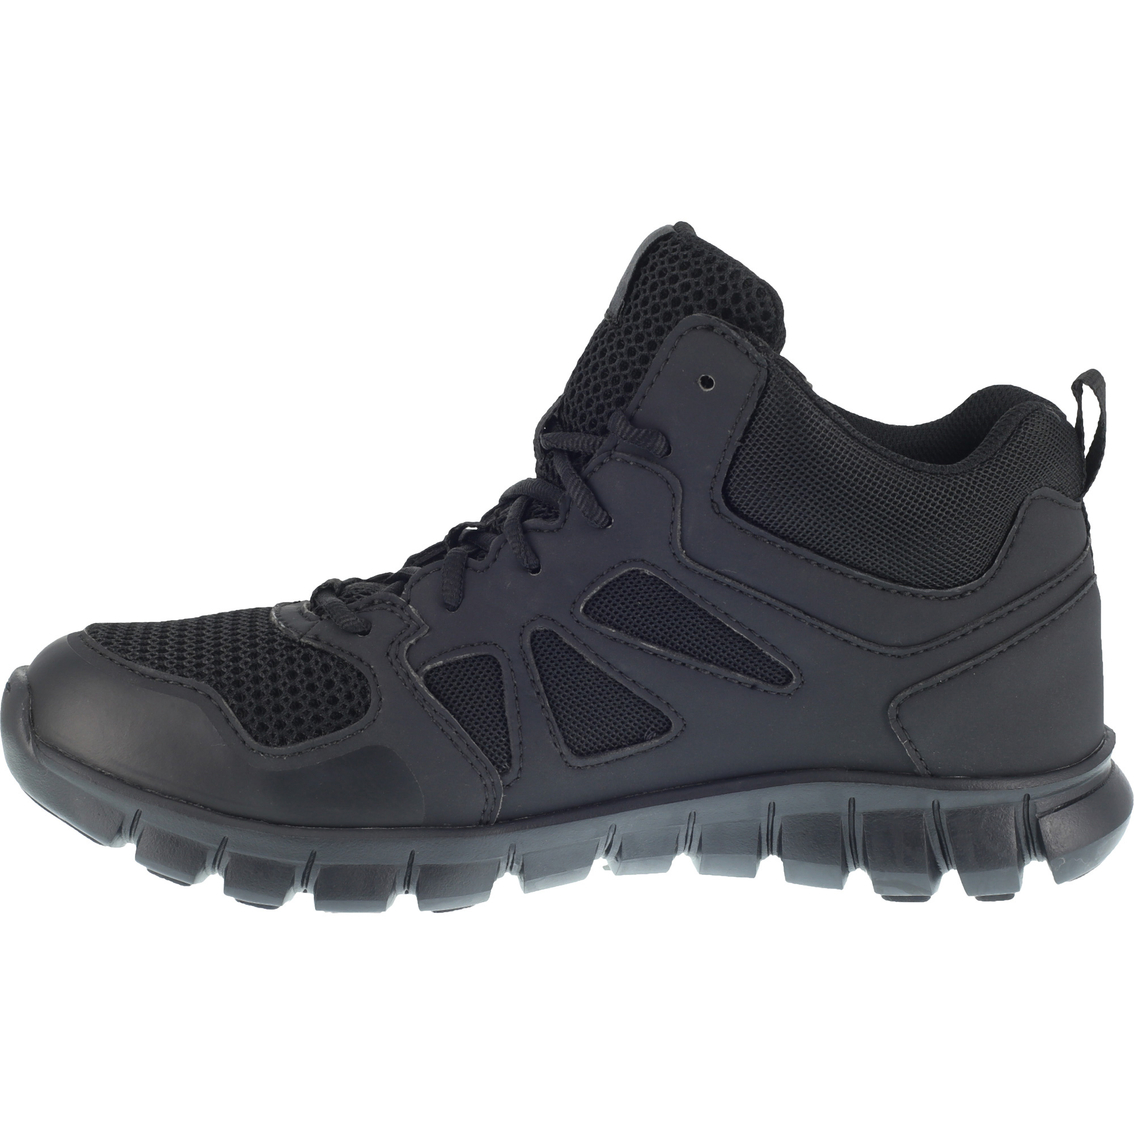 Reebok Sublite Cushion Tactical Mid Cut Boots - Image 4 of 6